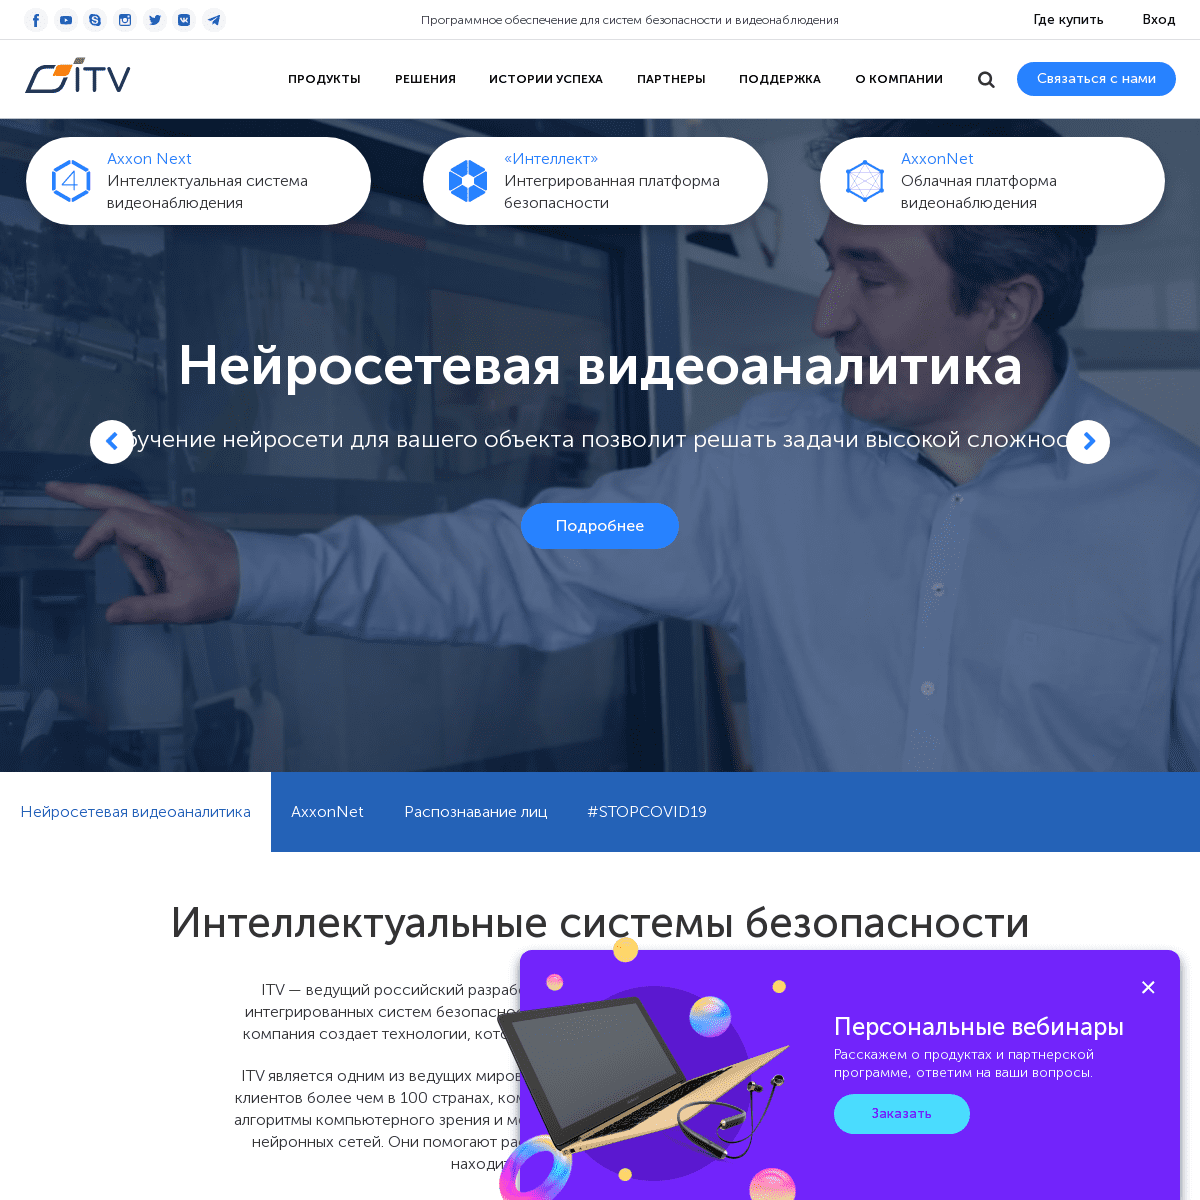 A complete backup of https://itv.ru